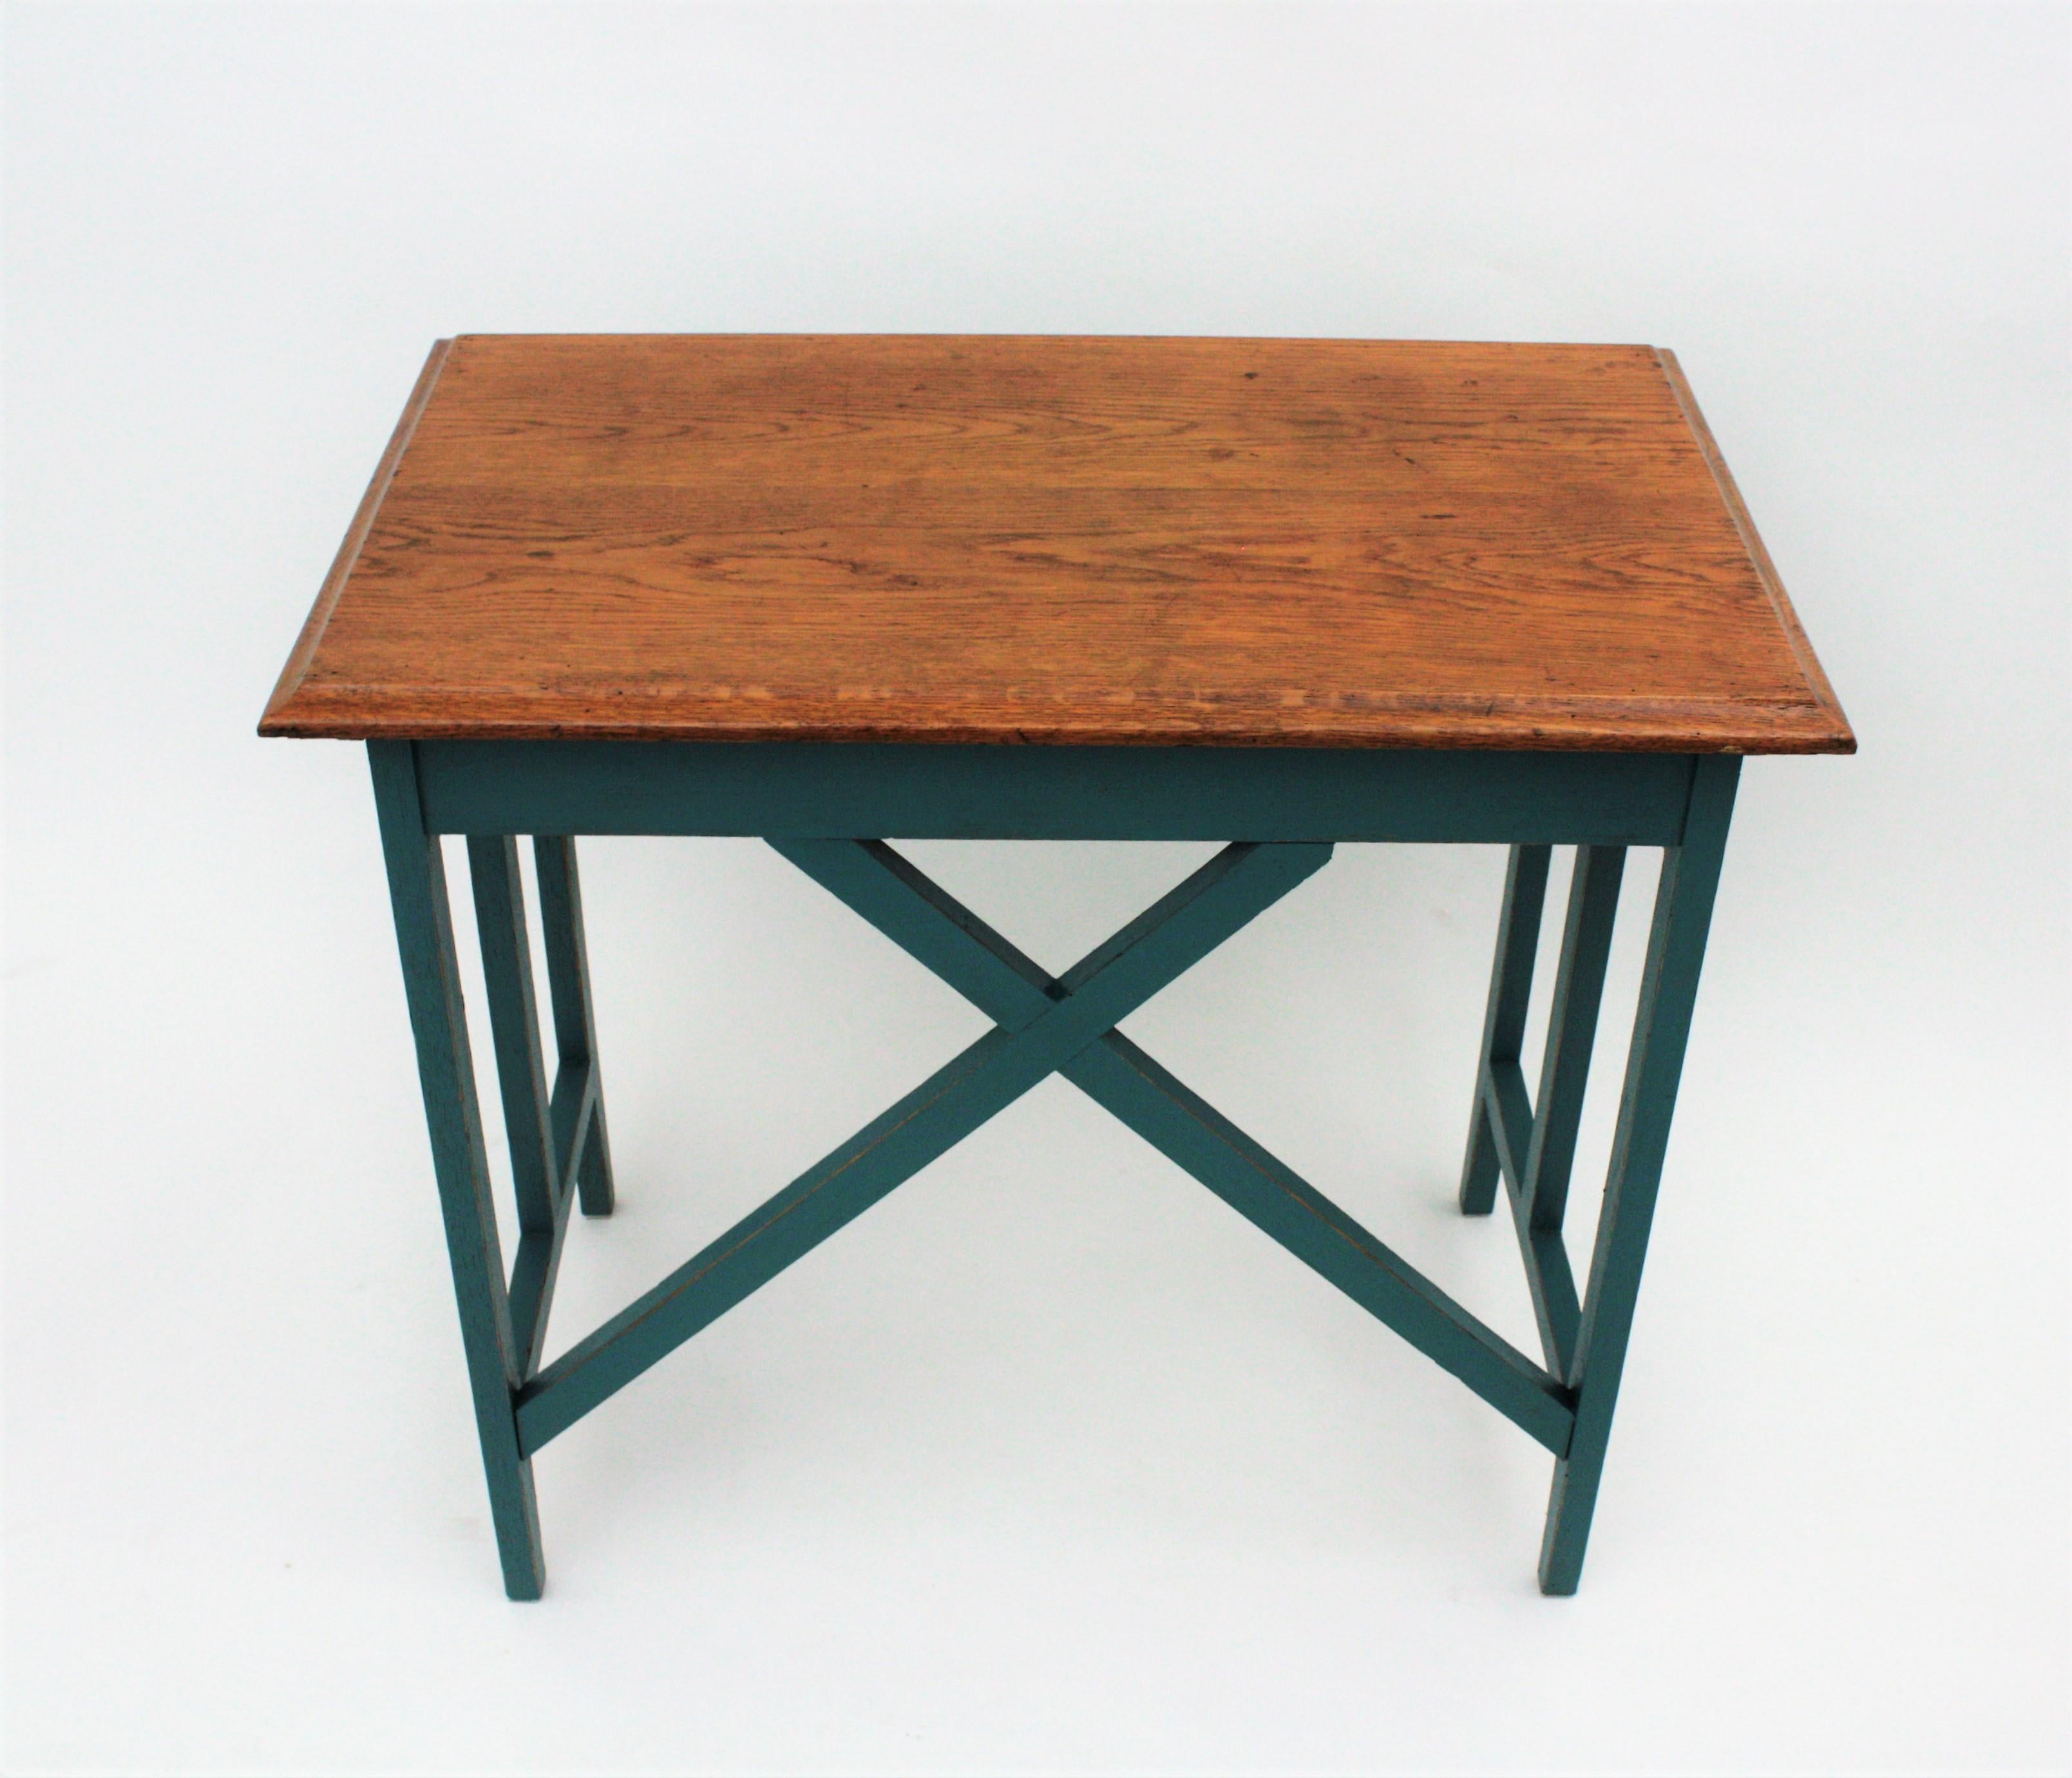 Spanish Desk and Stool in Oak with Green Blue Patina, 1930s For Sale 7